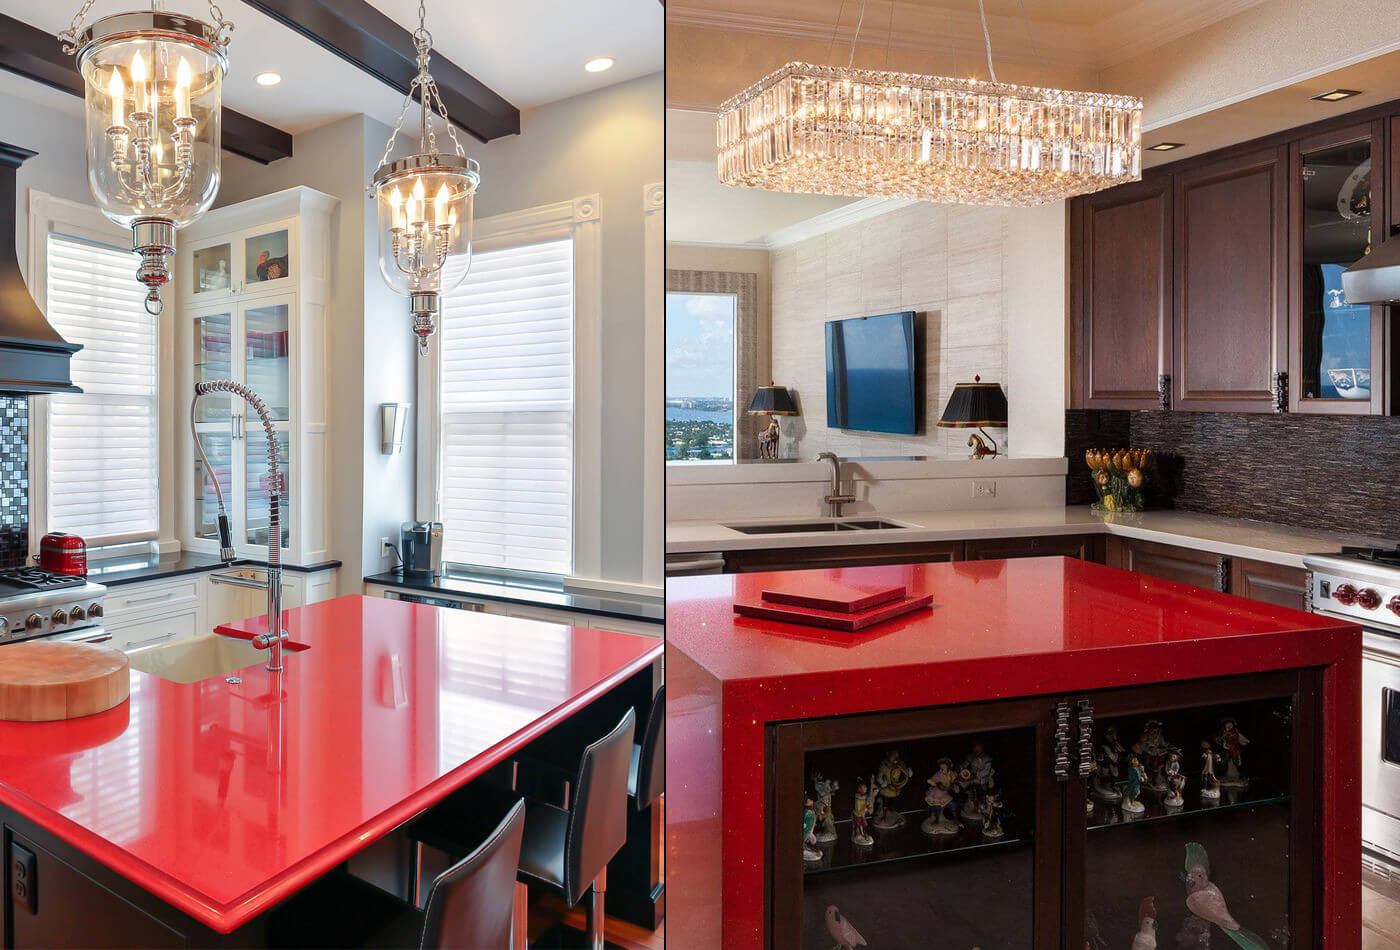 Choosing Red Countertop for kitchen